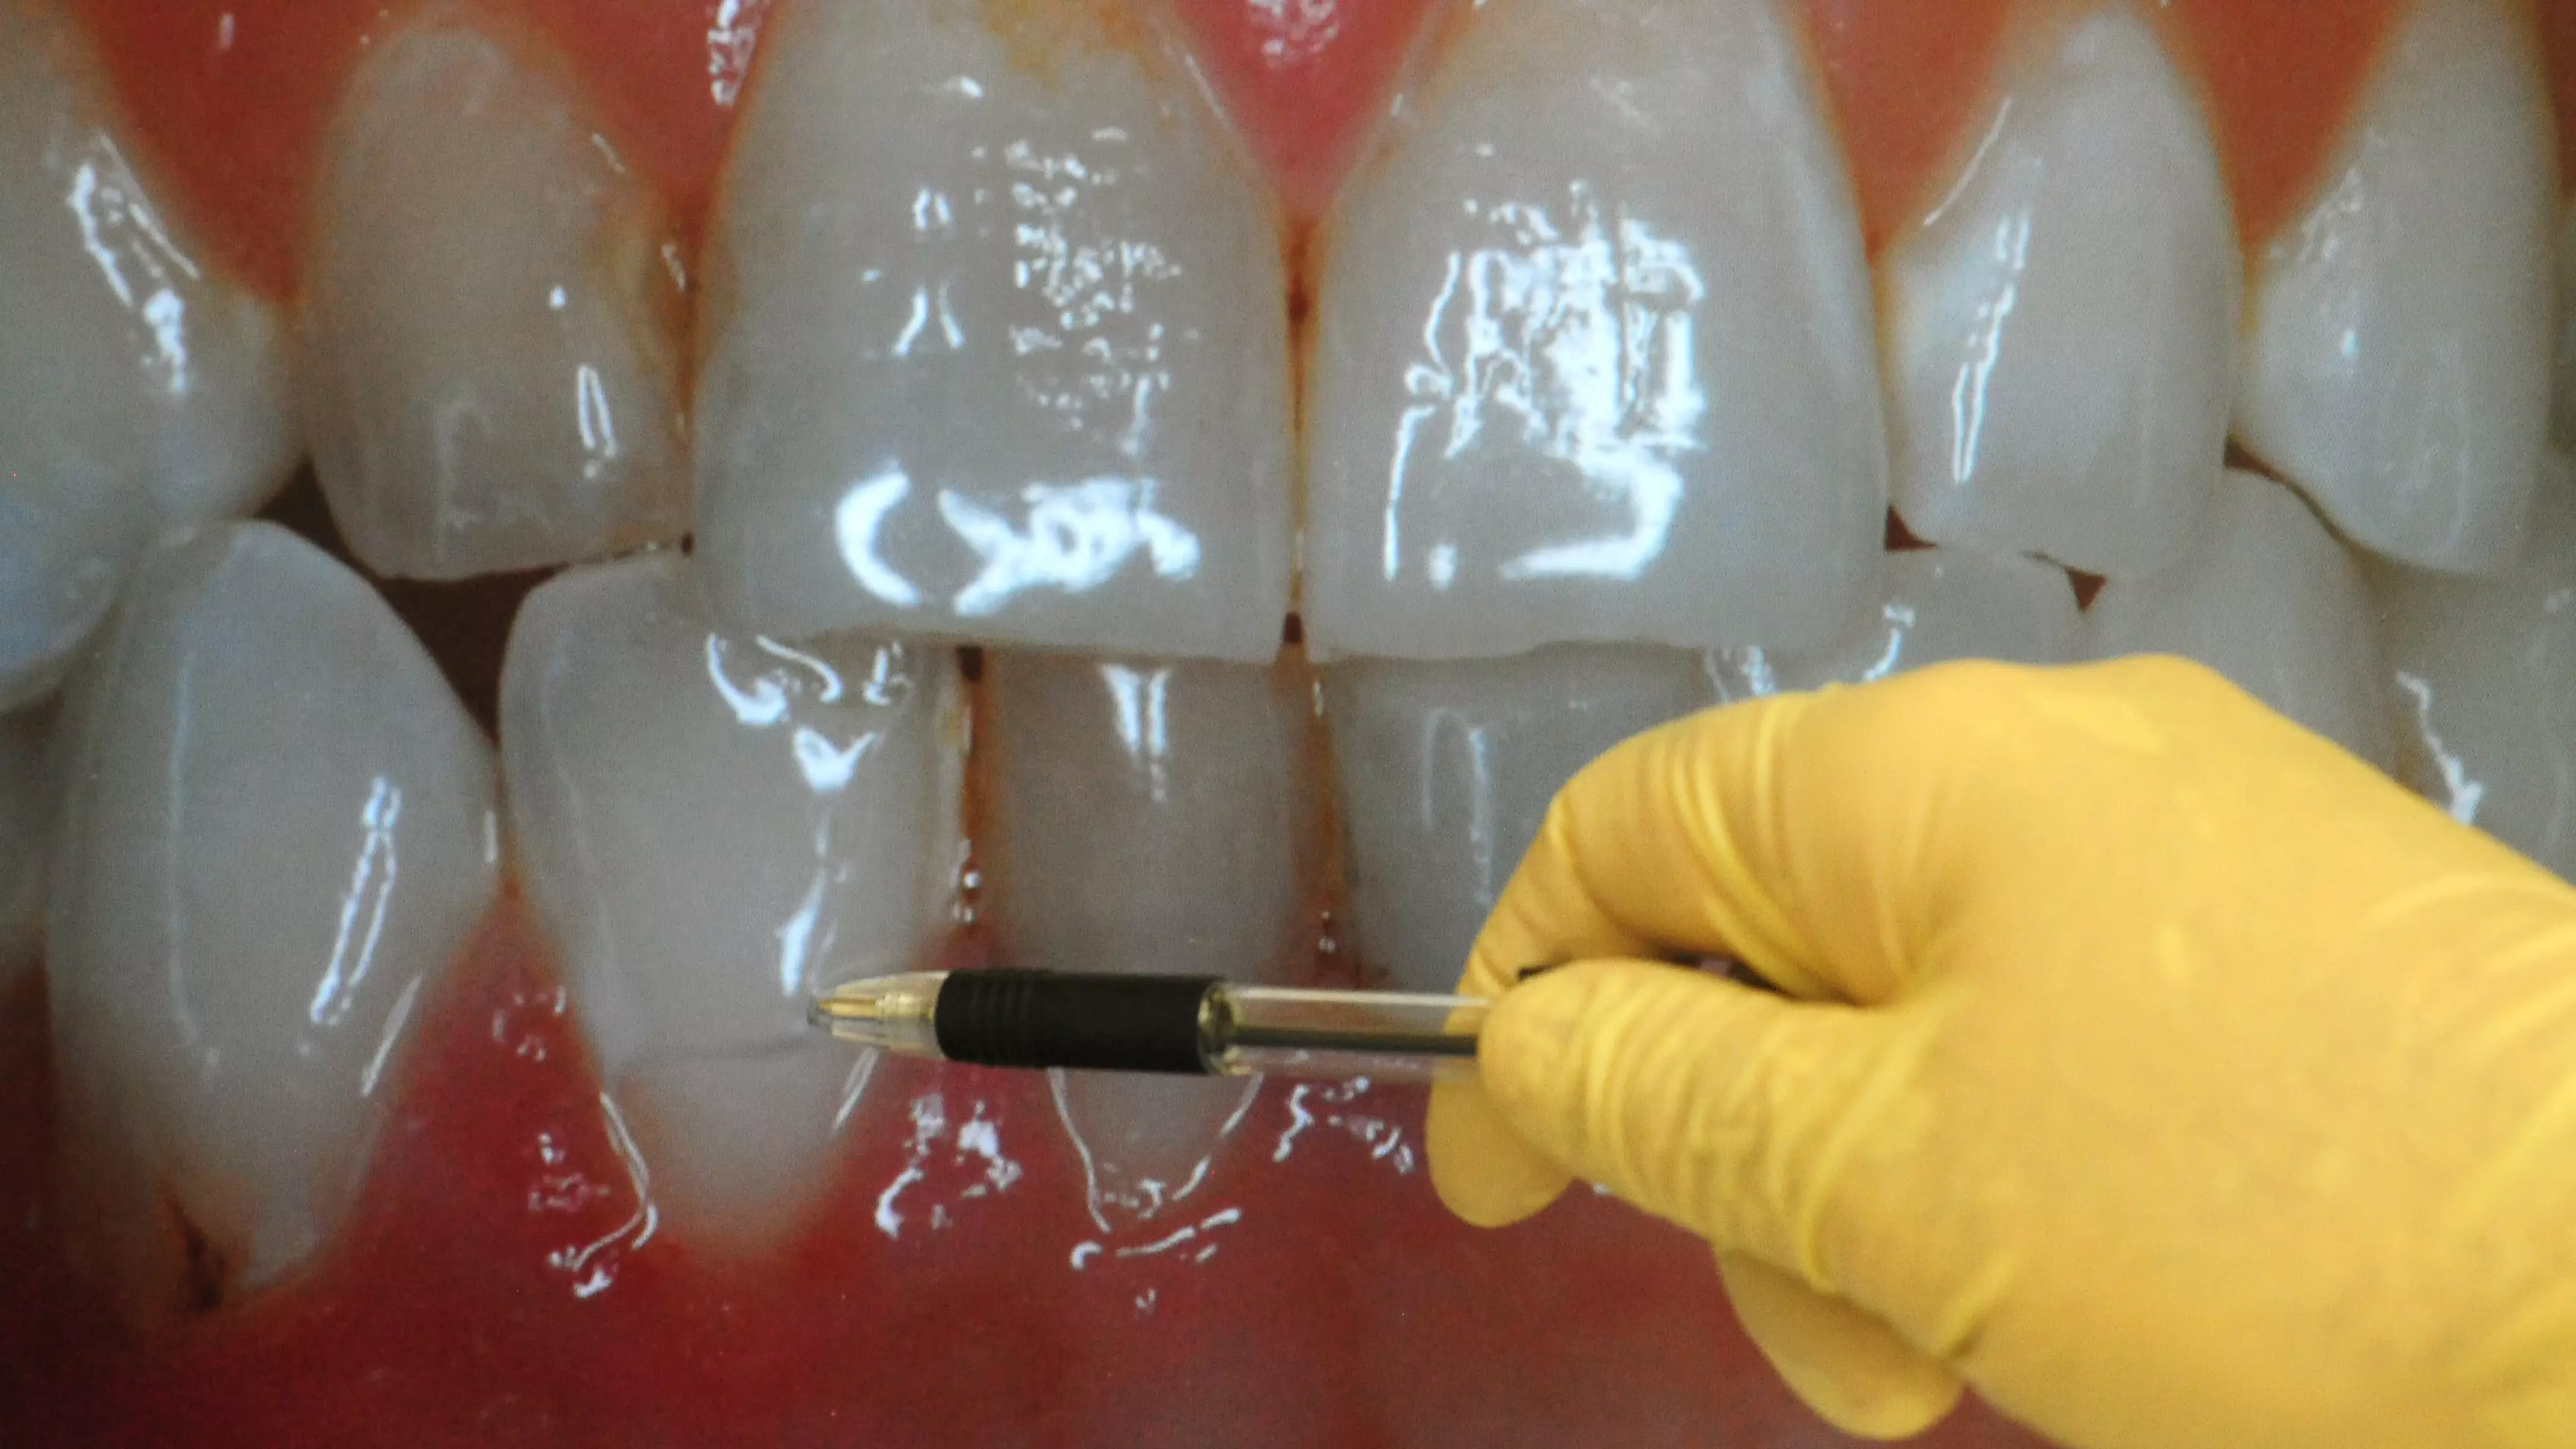 Top Dentist Reveals Common Bad Habits That Could Be Damaging Your Teeth